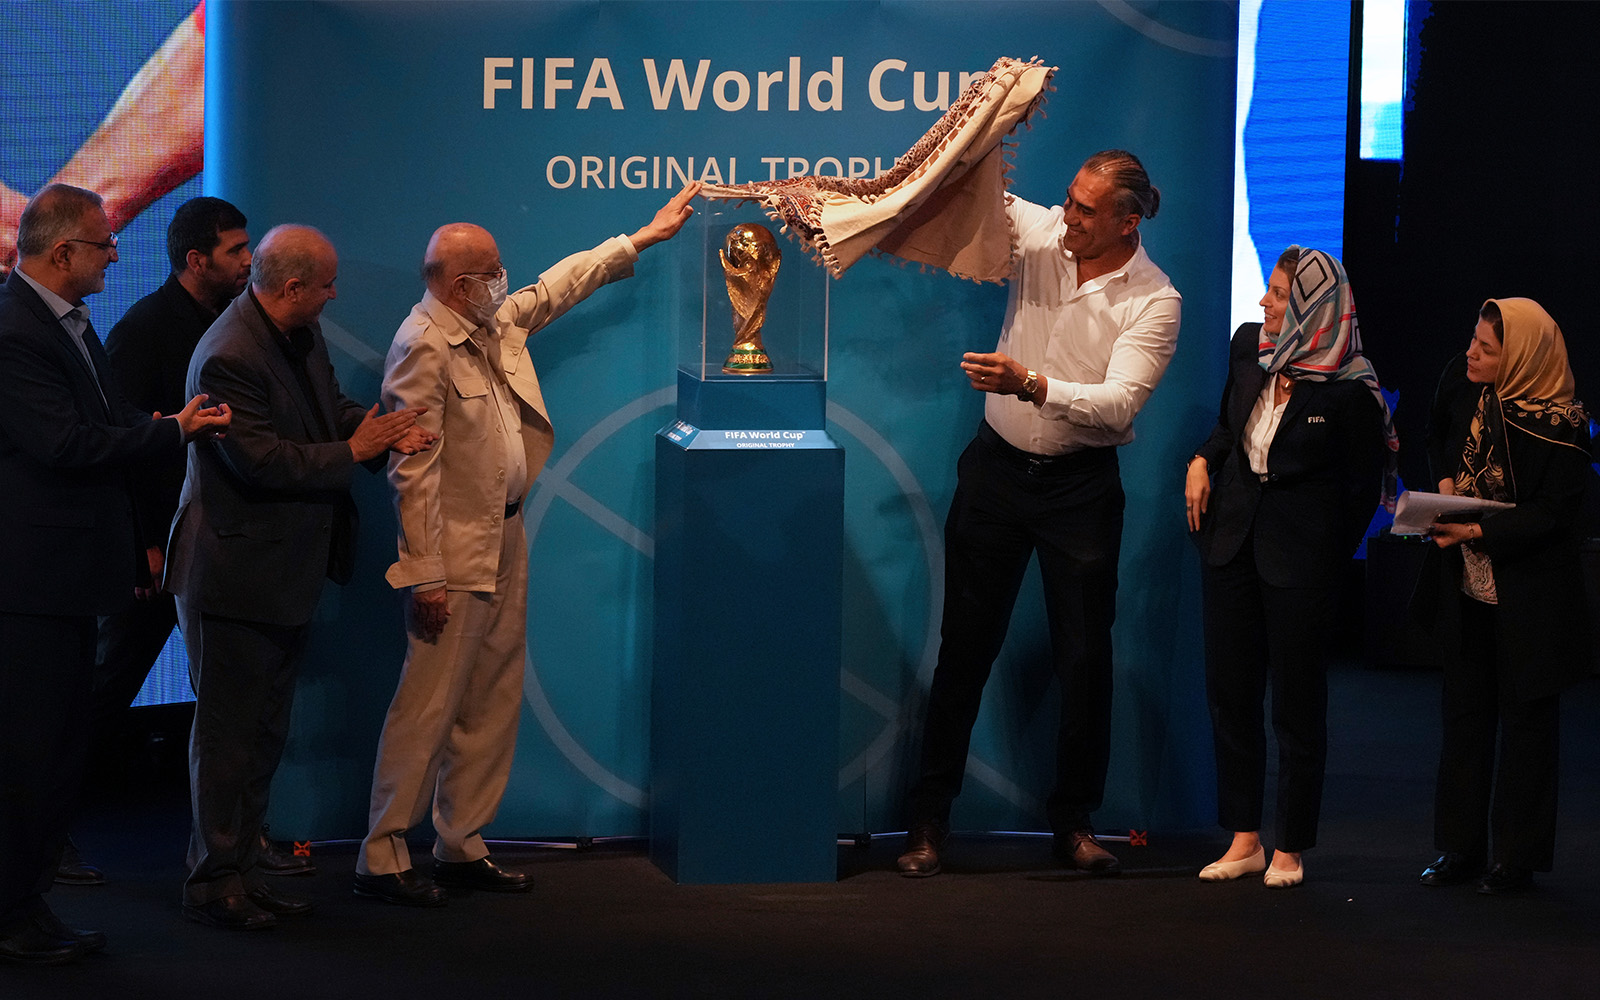 The FIFA World Cup trophy is coming to N.J. Here's how to get free